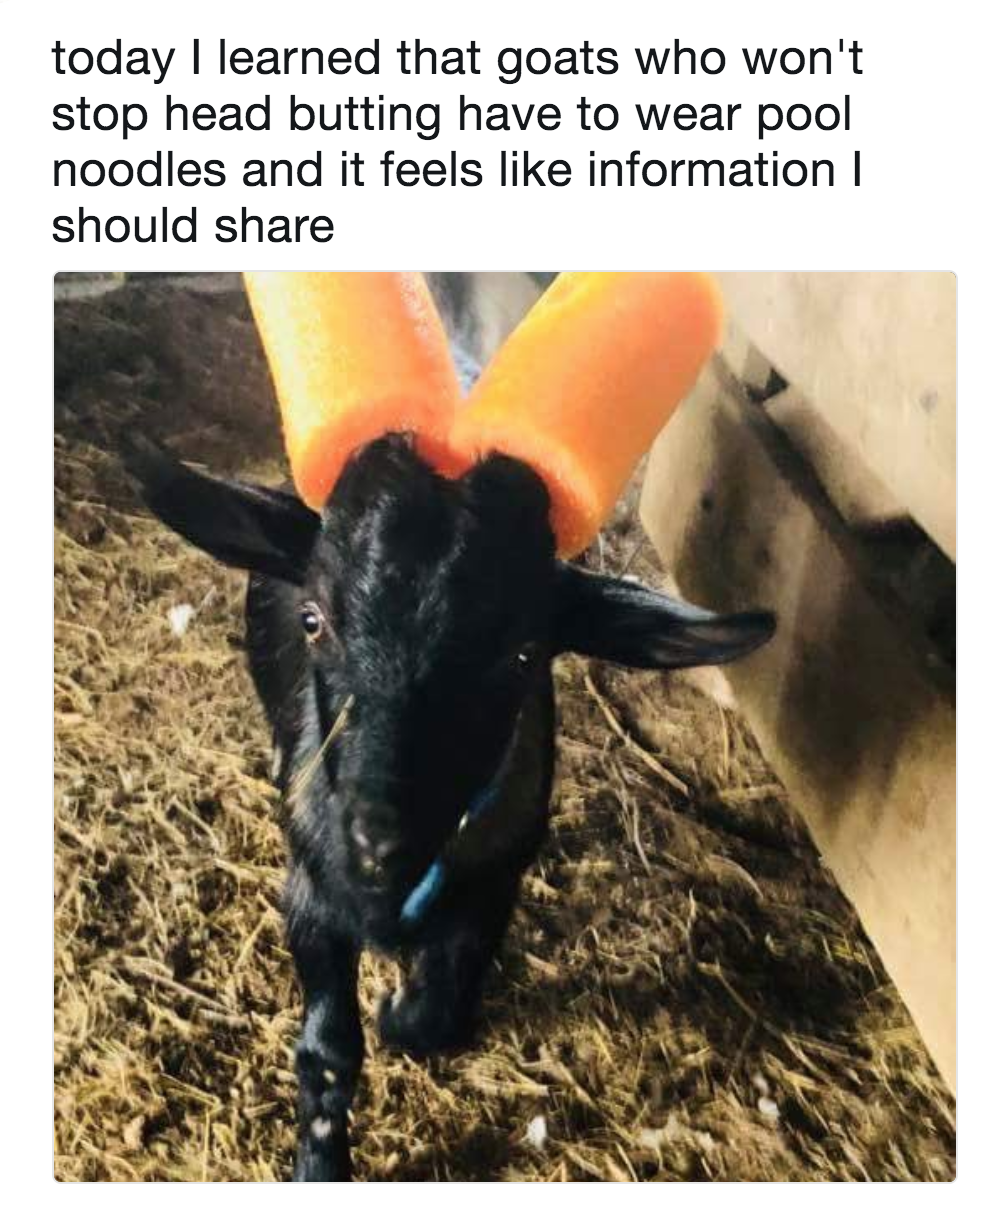 beedablogs:
“naughty goats get the noodle horns
”